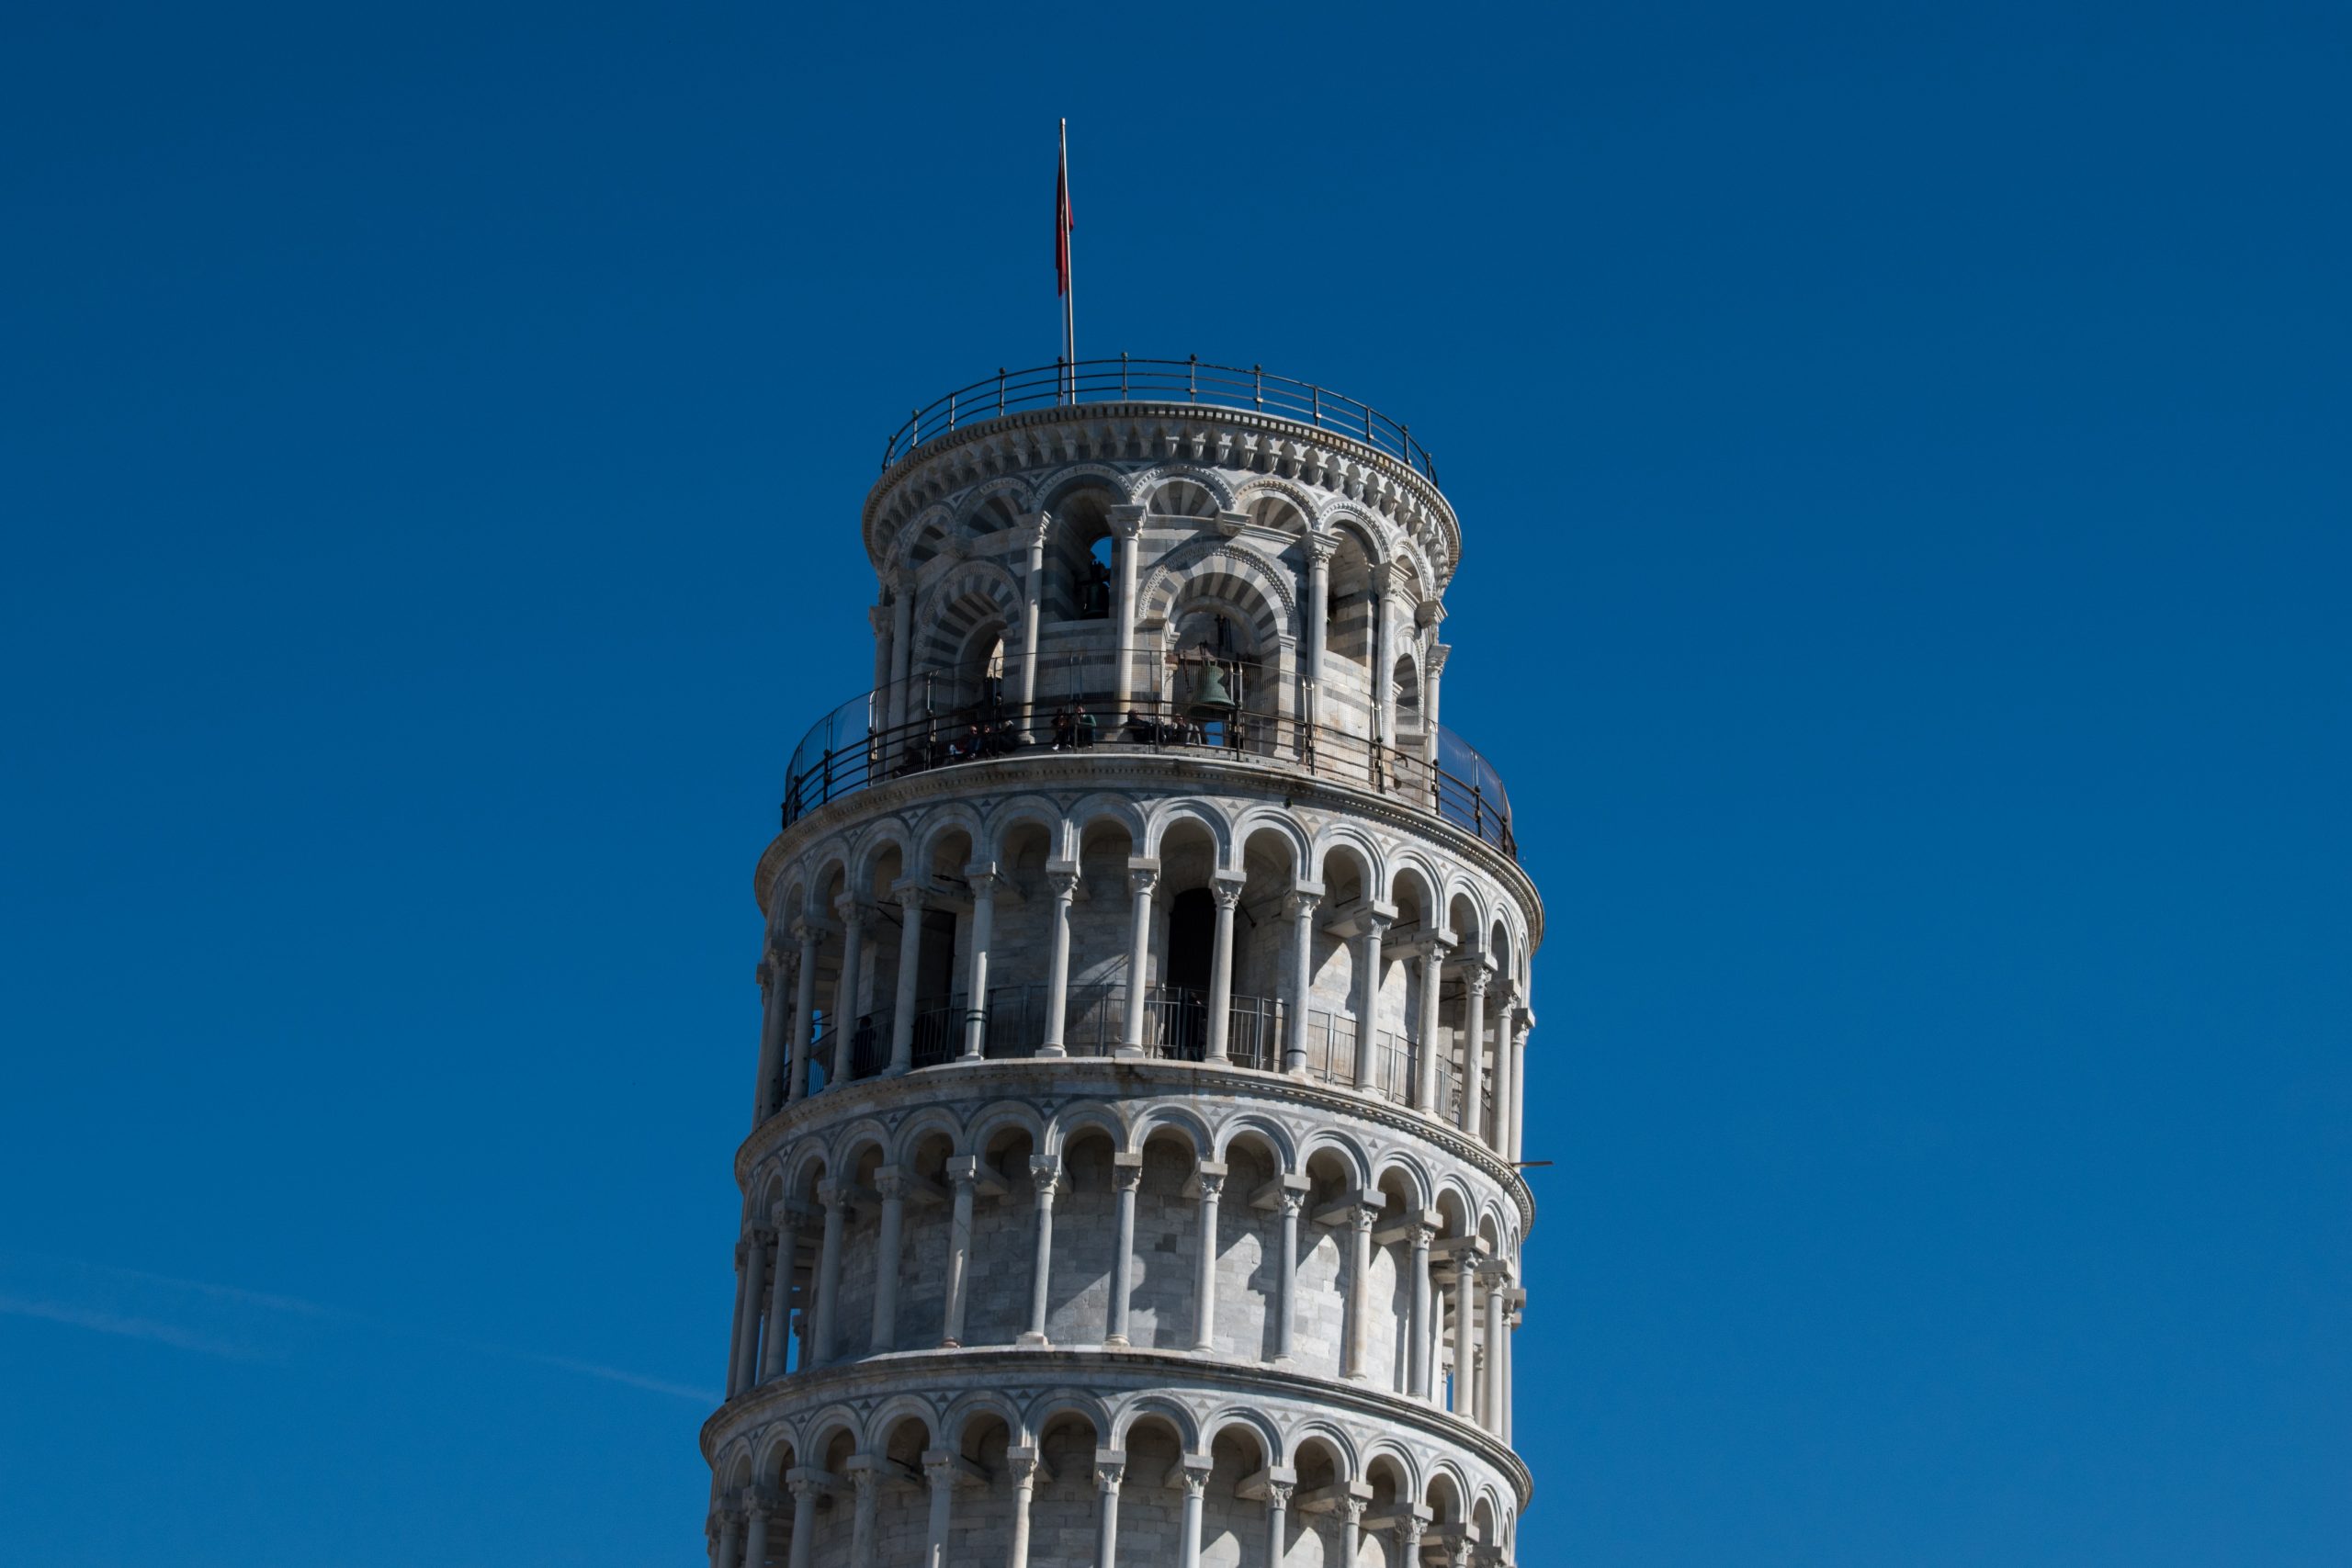 How Does The Leaning Tower of Pisa Still Lean After Hundreds of Years?